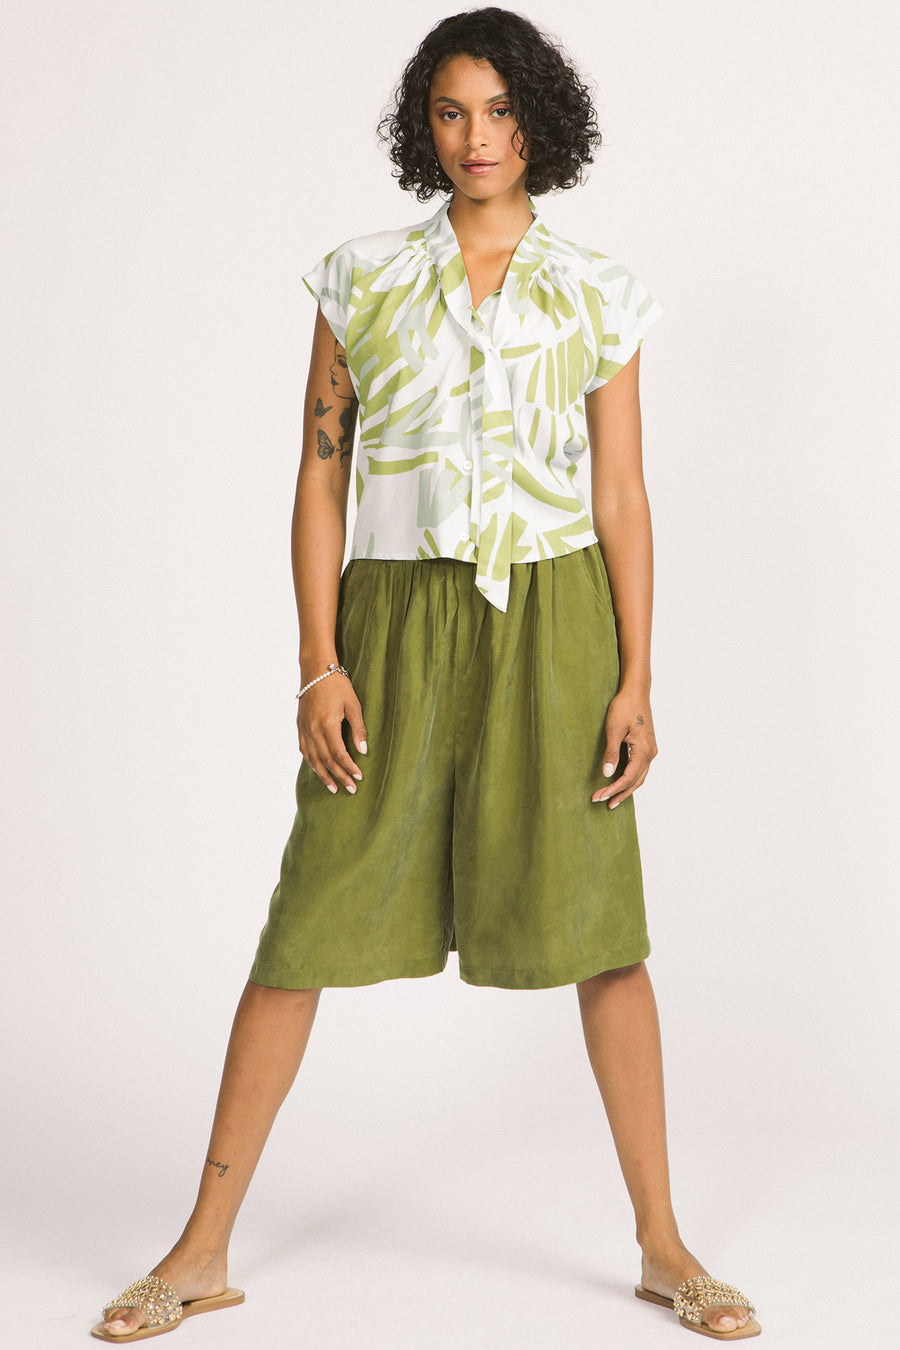 Woman wearing a green and white leaf print Isabeau blouse by Allison Wonderland. 